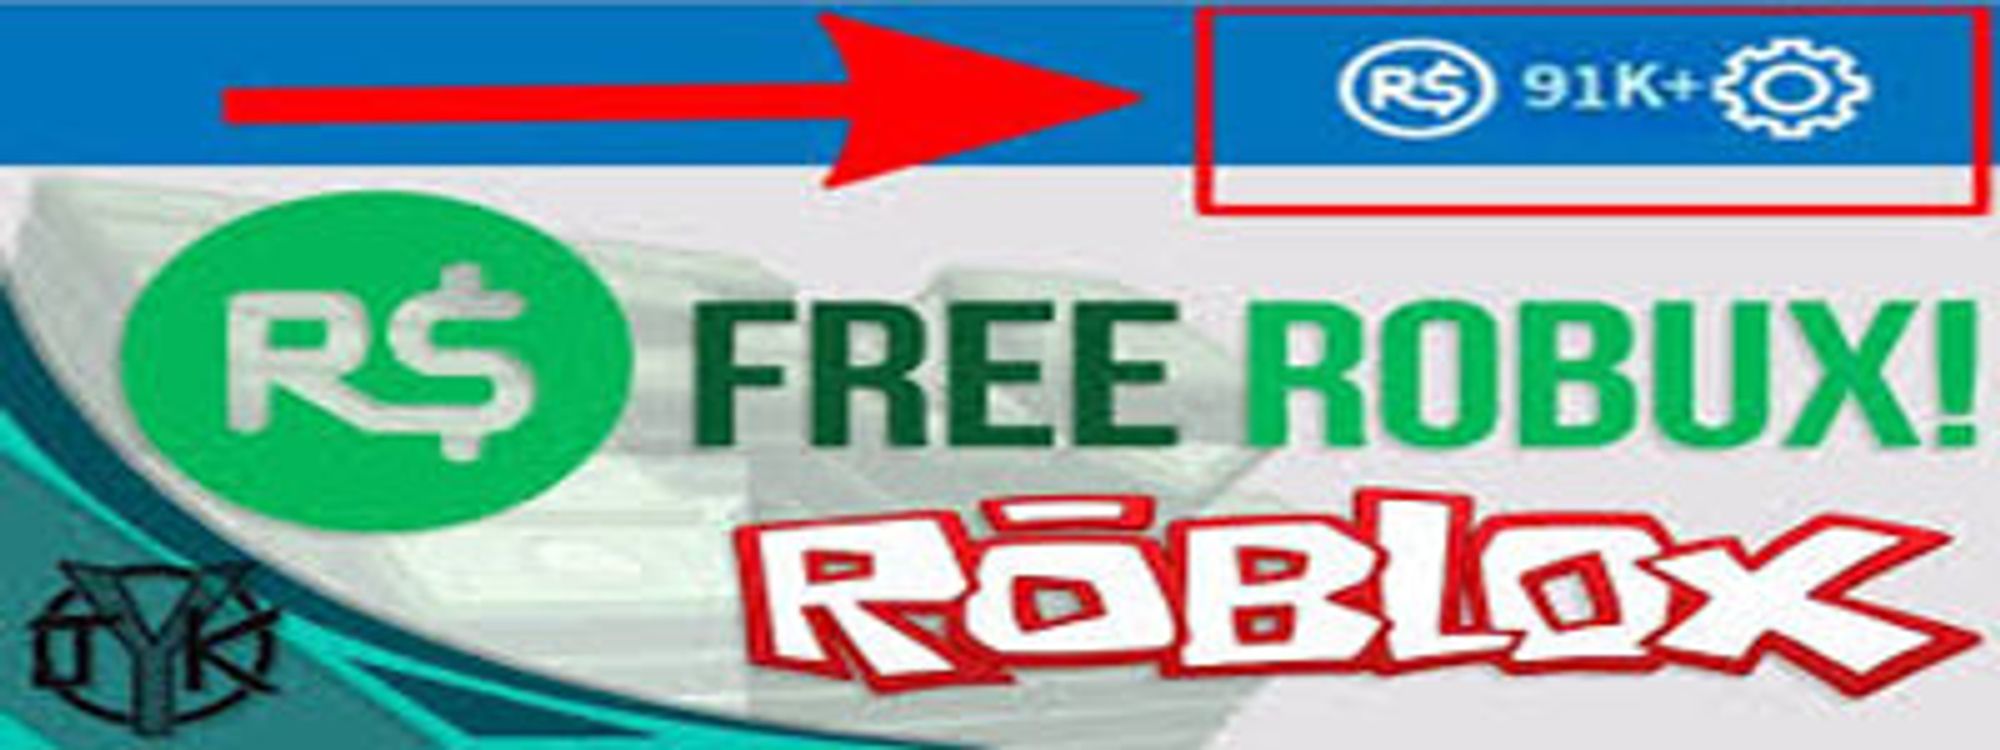 Roblox Robux Free Roblox Robux Codes With Skins Password Account 2020 - how to make a roblox logo bonk io free roblox robux codes 2017